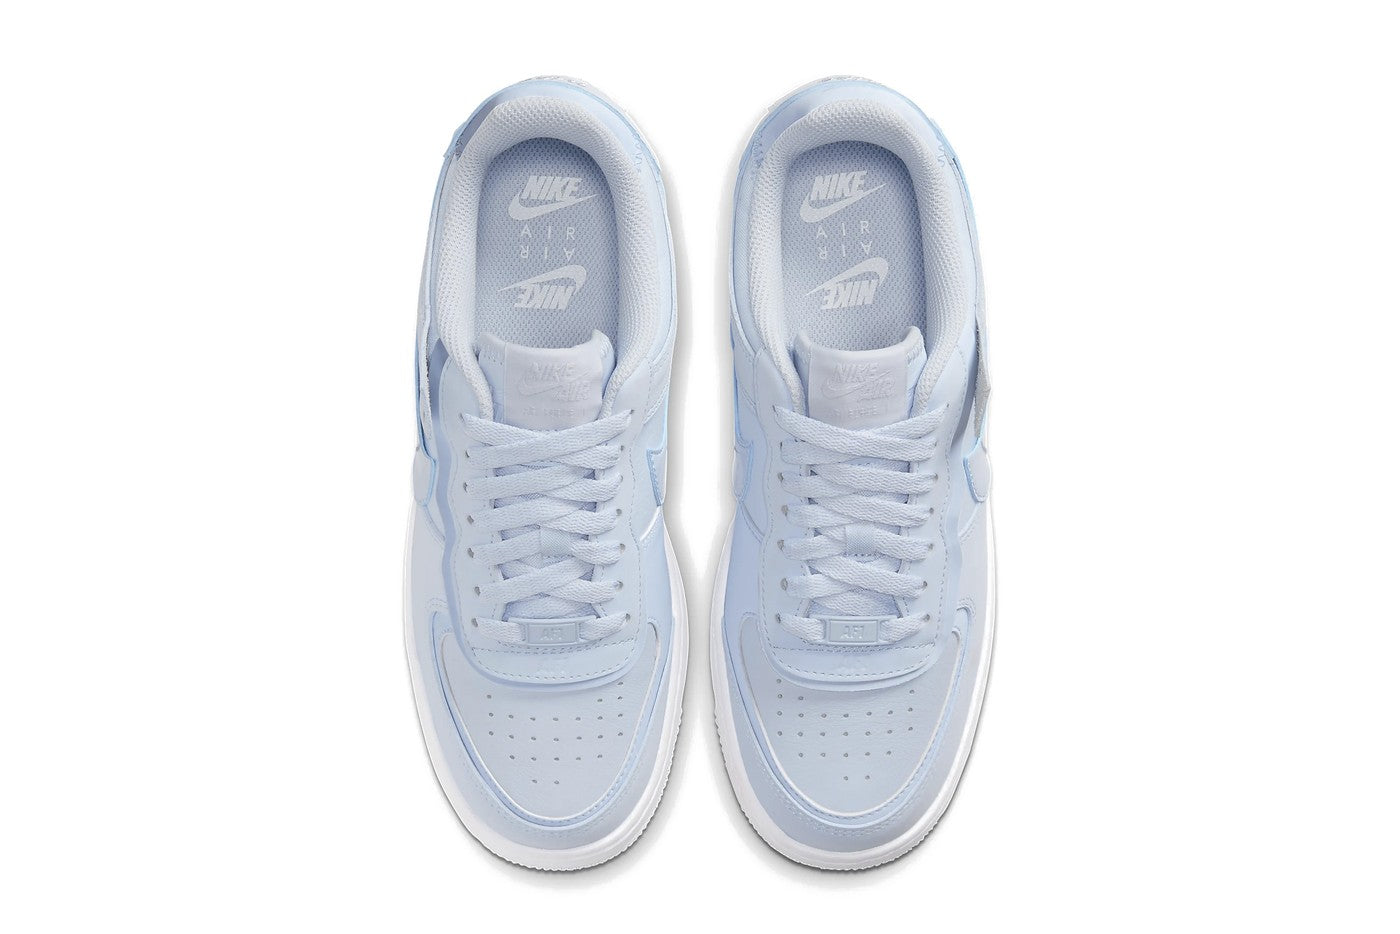 Nike Air Force 1 Shadow parcel Shoes for Women (Blue)